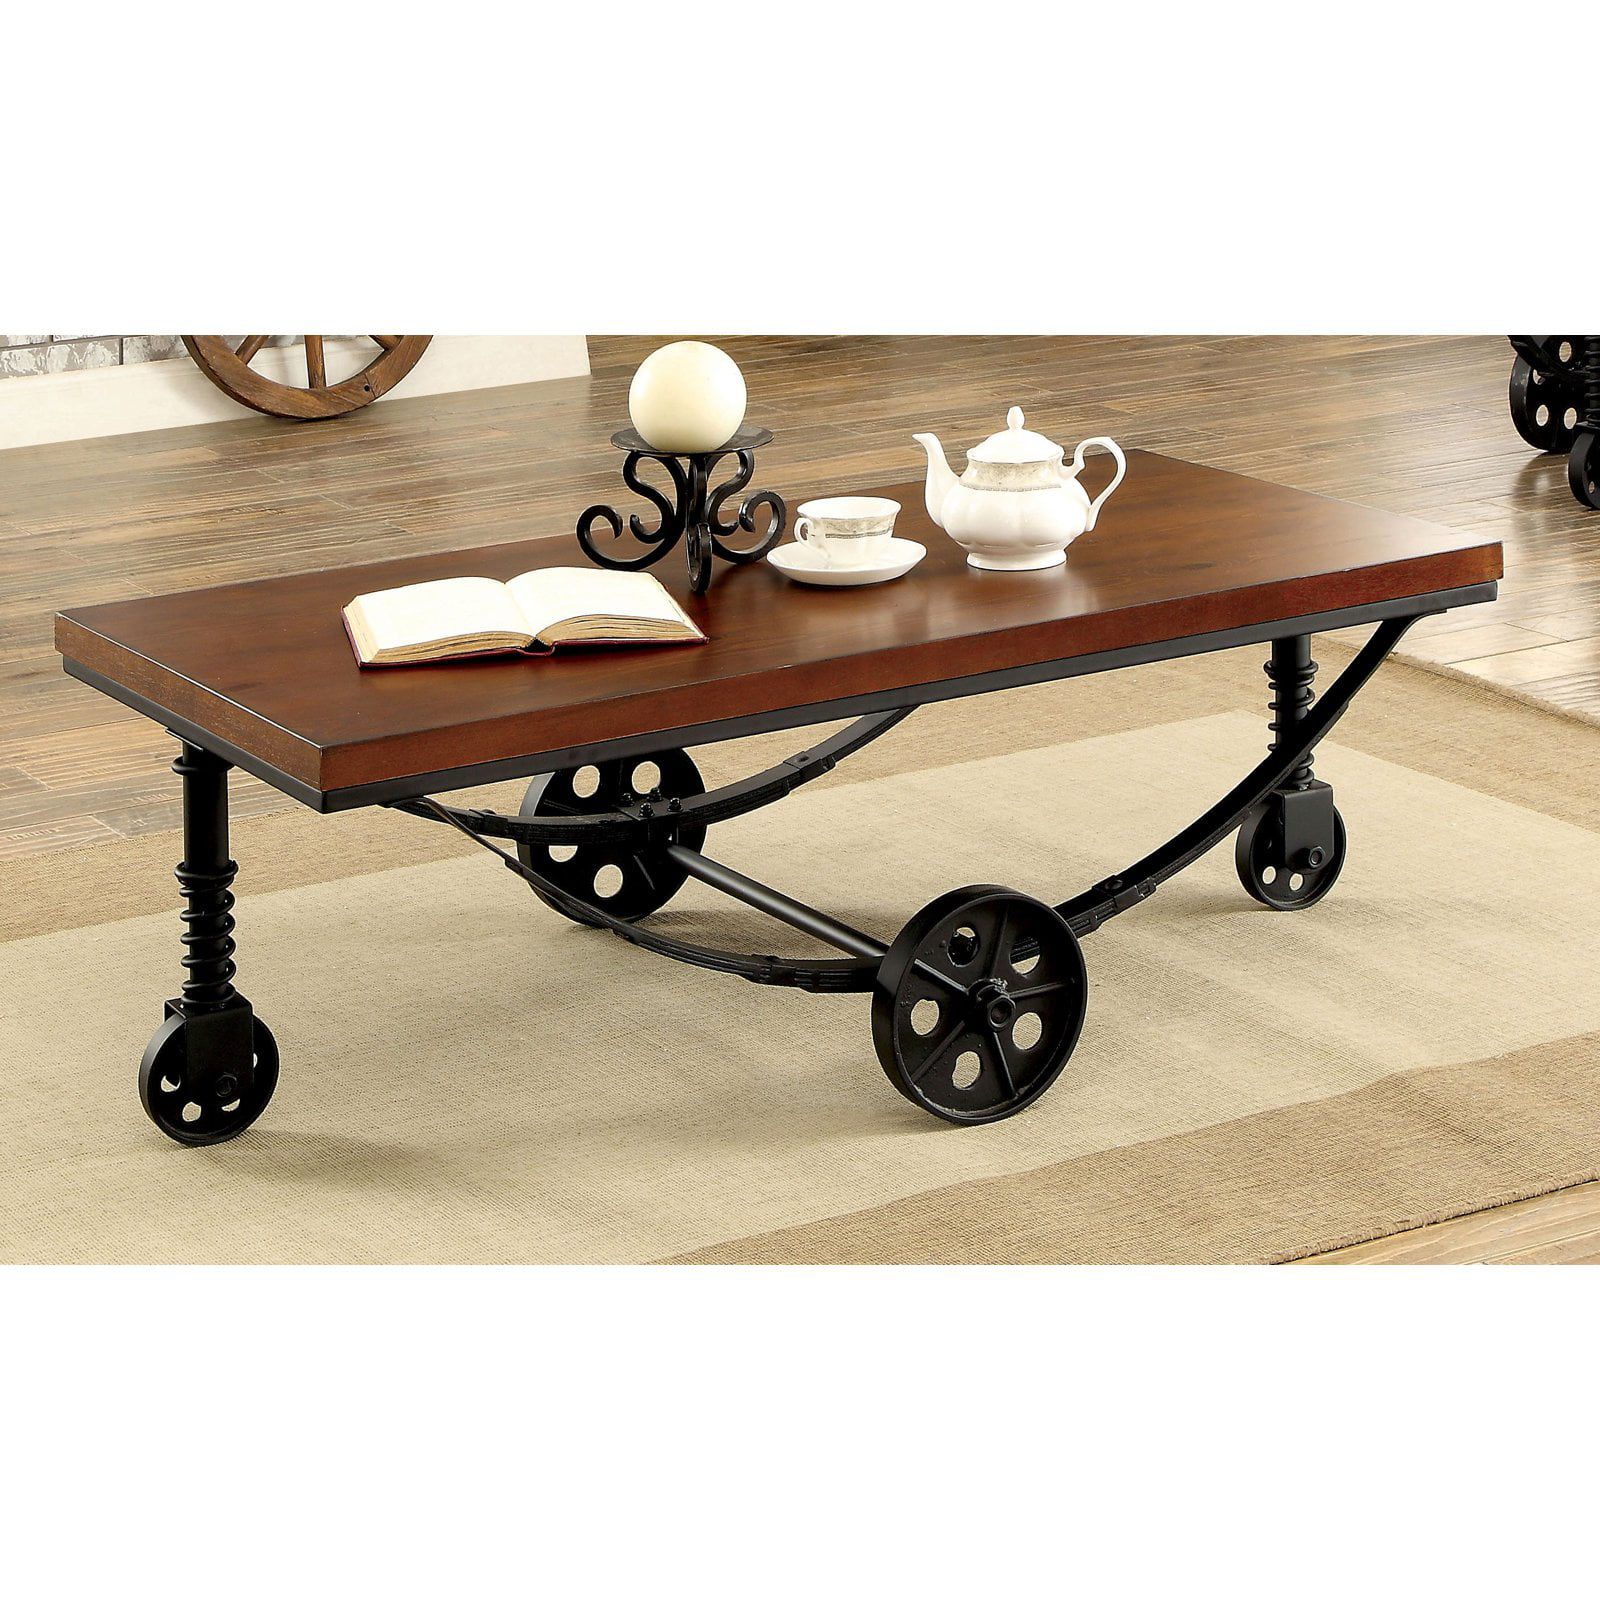 Furniture Of America Mator Industrial Style Caster Wheel Coffee Table Throughout Coffee Tables With Casters (View 3 of 15)